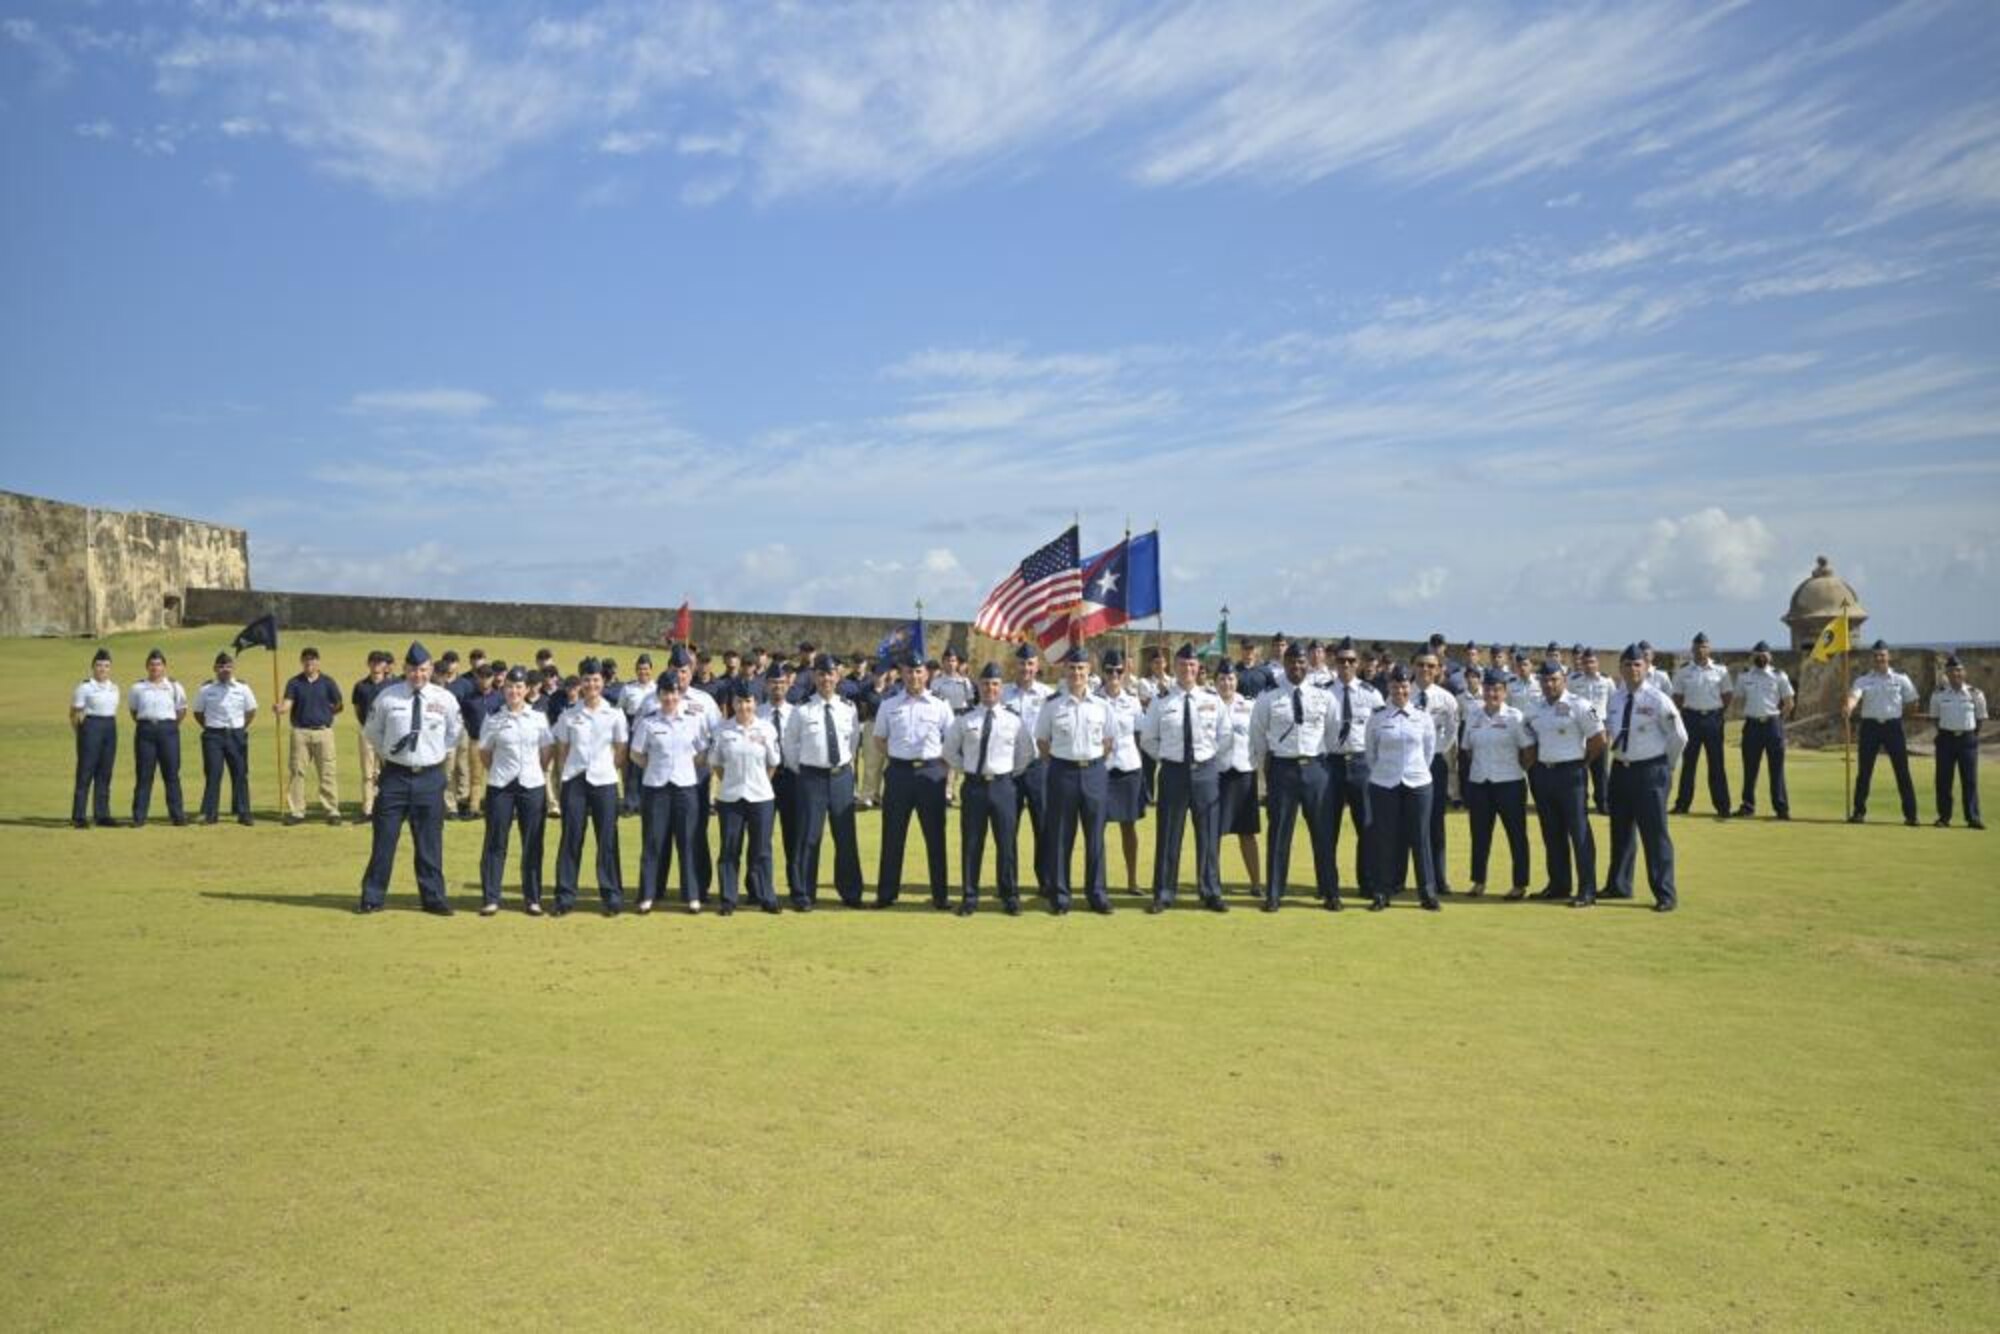 Members of Air Force Recruiting Service Detachment 1, 330th Recruiting Squadron, 342nd RCS and 333rd RCS pose for a picture.